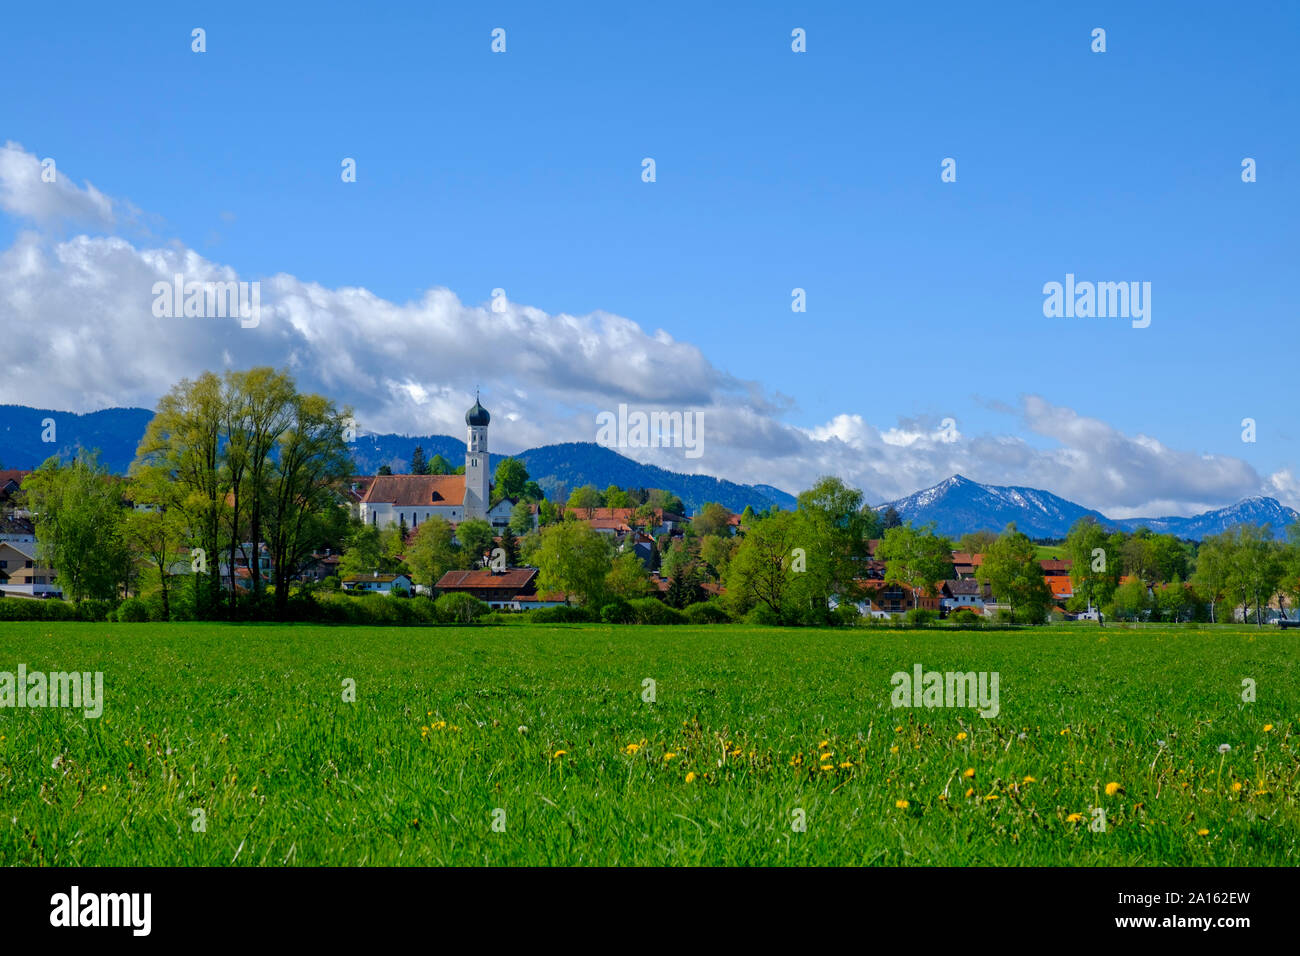 Grass and trees in front of town in Alpine Foothills, Konigsdorf, Bavaria, Germany Stock Photo